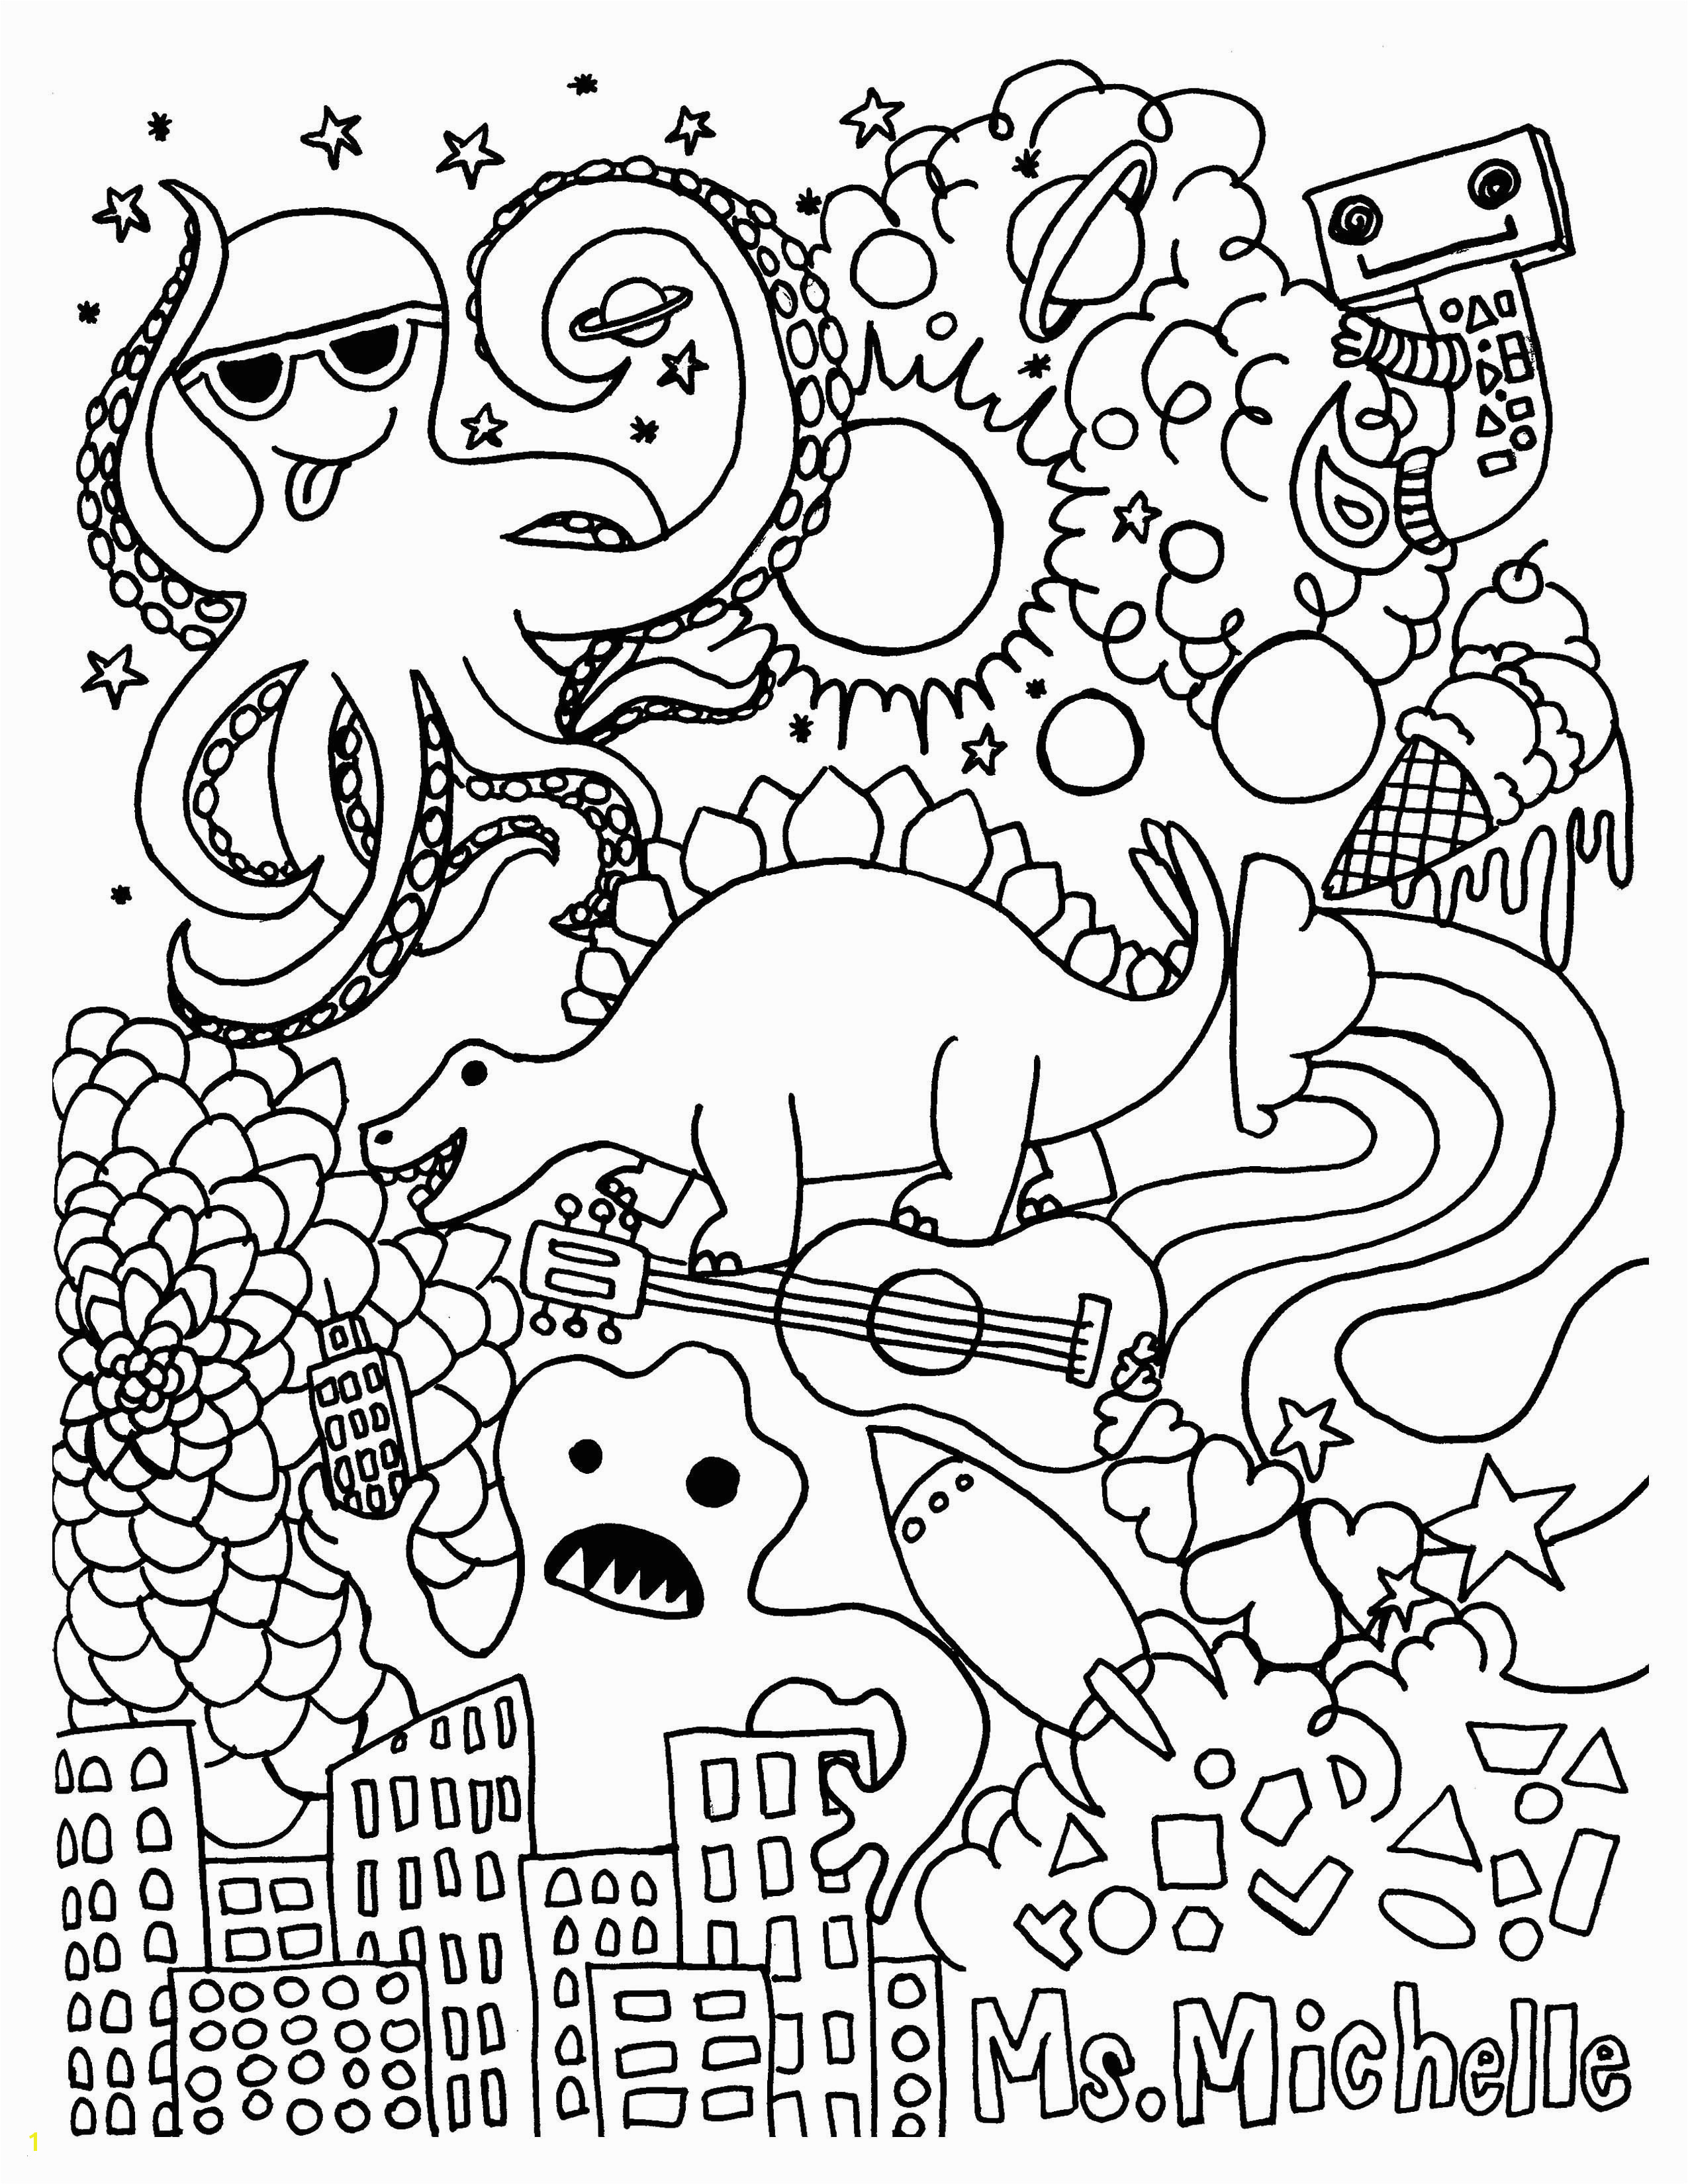 Free Coloring Pages On Bullying Mikalhameed Just Another WordPress Site